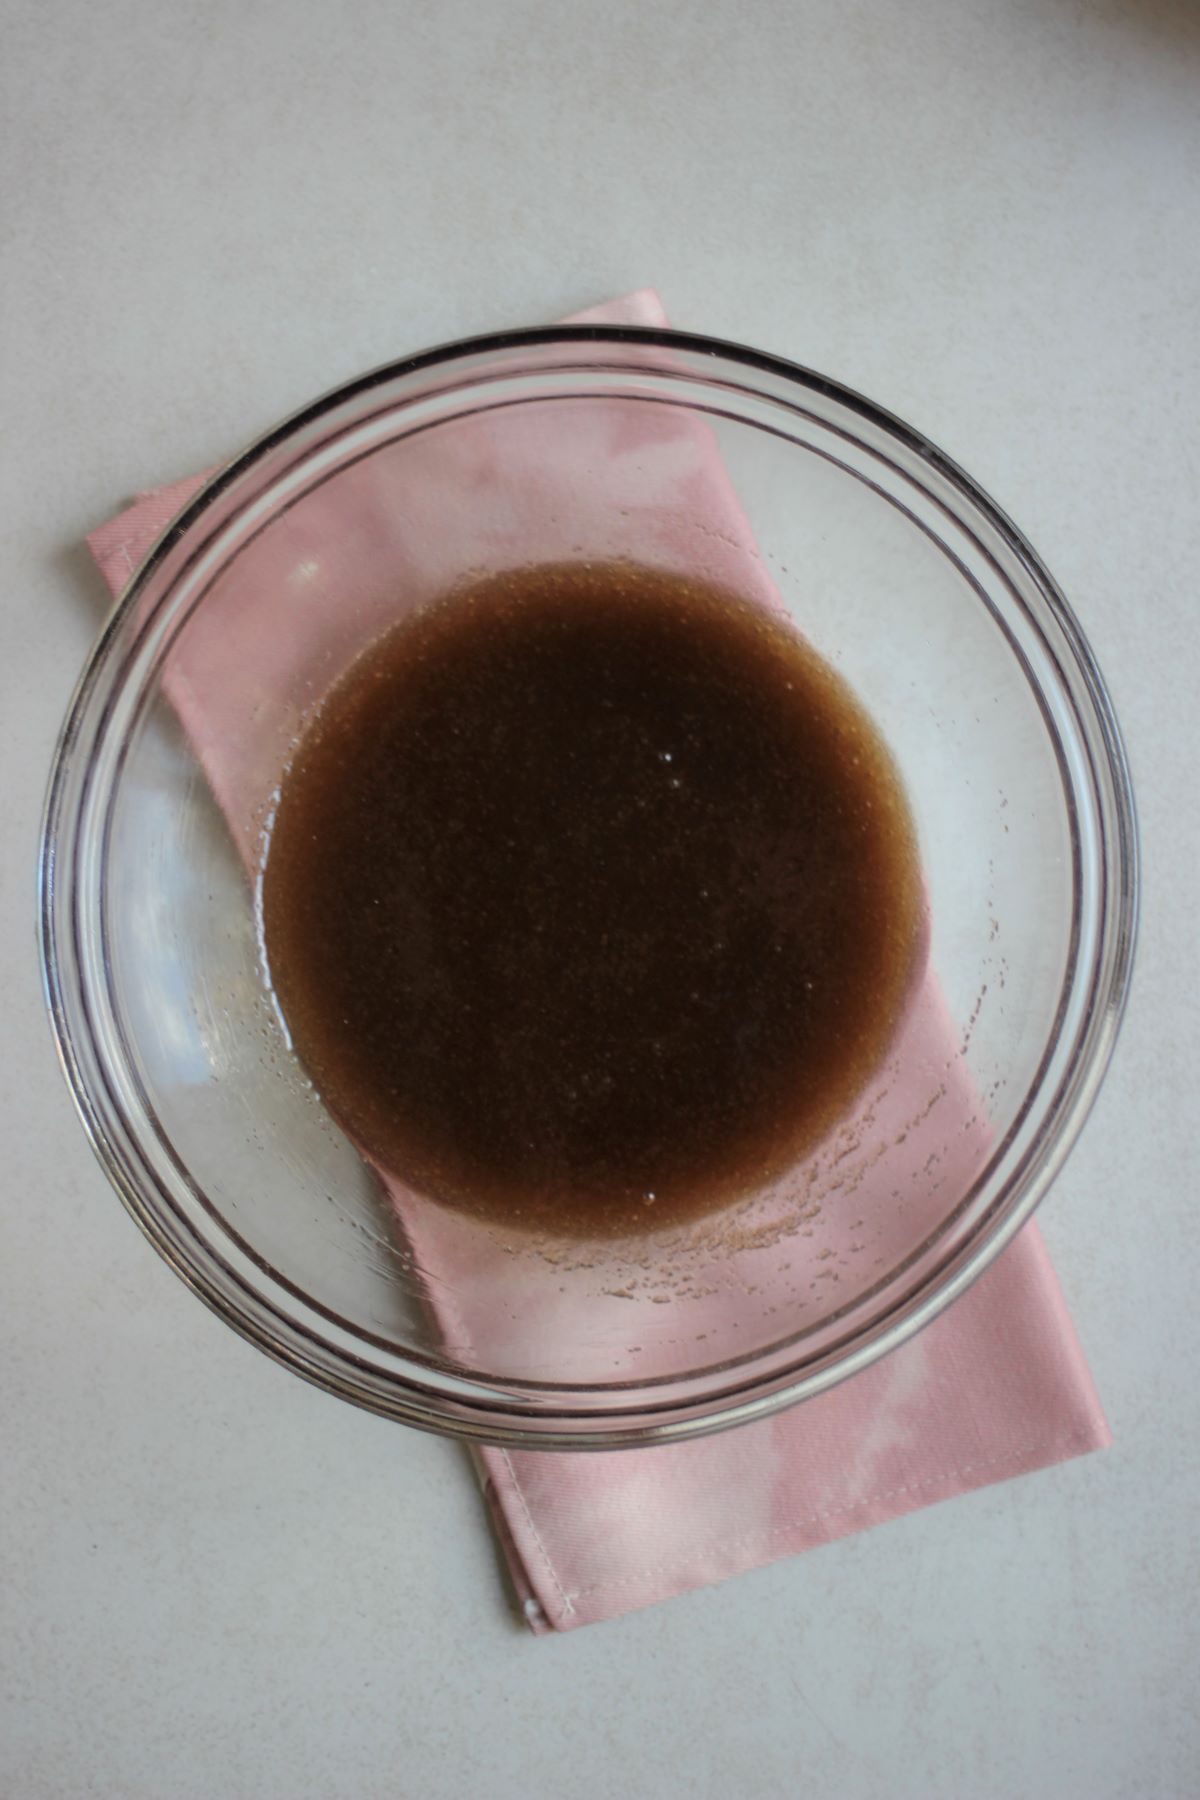 Glass bowl with a brown mixture. A pink napkin under the bowl.